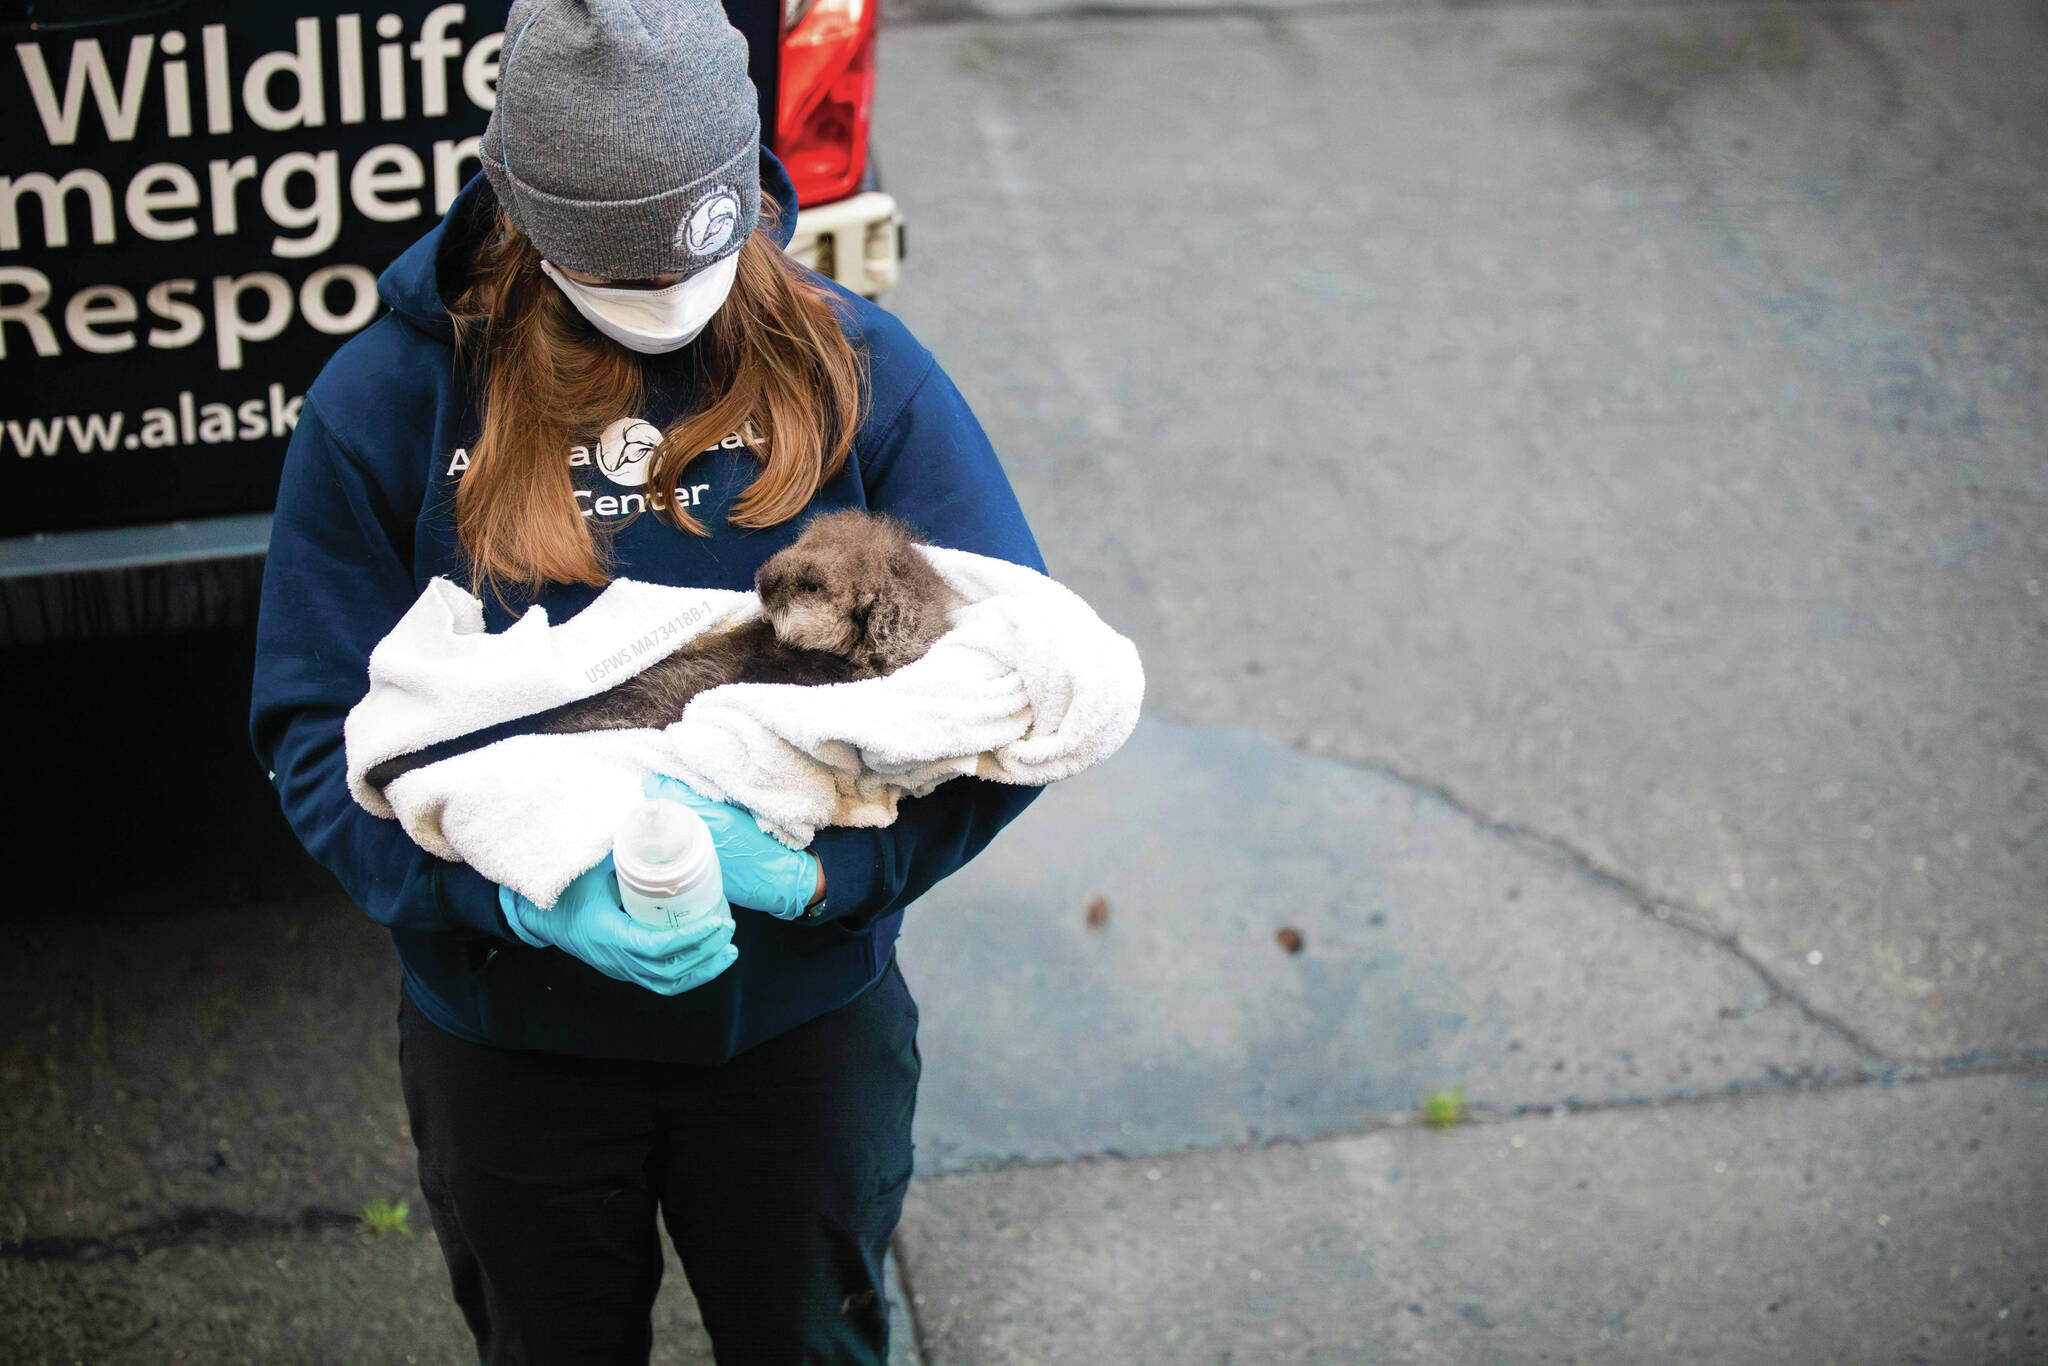 Alaska SeaLife Center veterinary technician Jessica Davis carries a newborn otter pup patient into the Alaska SeaLife Center Veterinary clinic for an initial admit exam on Sept. 9. The otter pup was admitted to the ASLC Wildlife Response Program after witnesses watched orcas attack the pup’s mother. (Photo courtesy Peter Sculli/Alaska SeaLife Center)